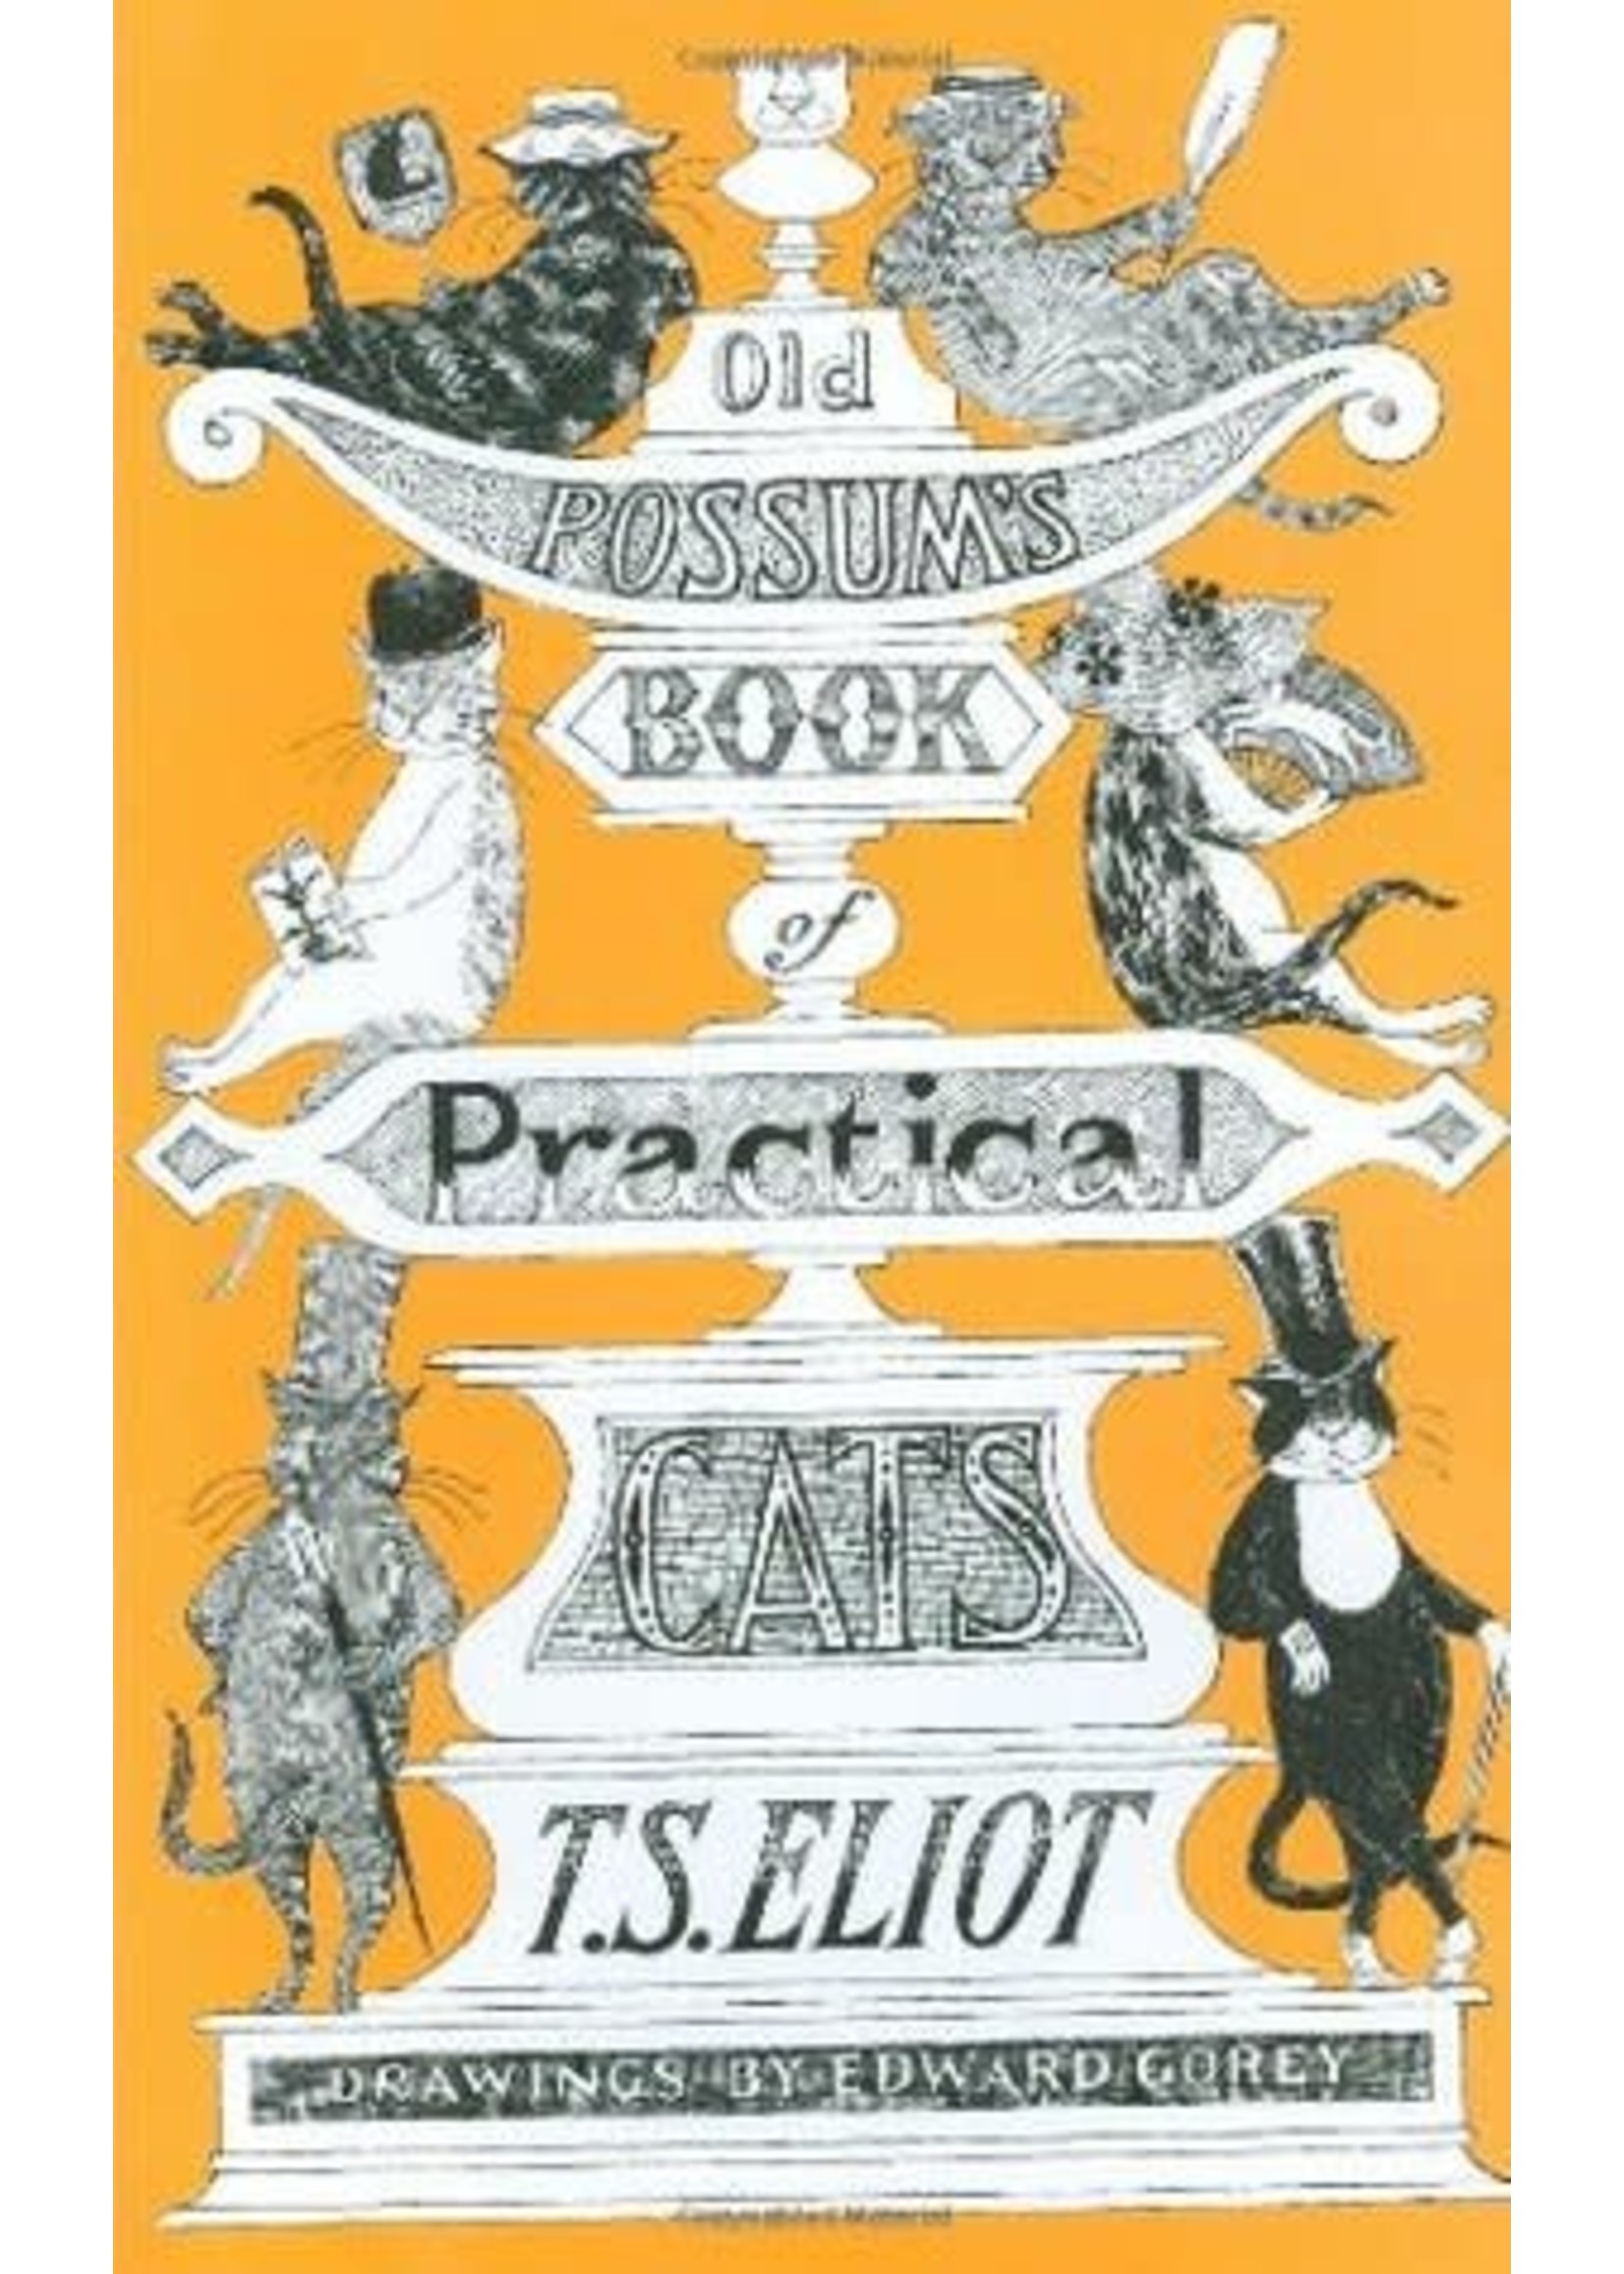 Old Possum's Book of Practical Cats by T. S. Eliot